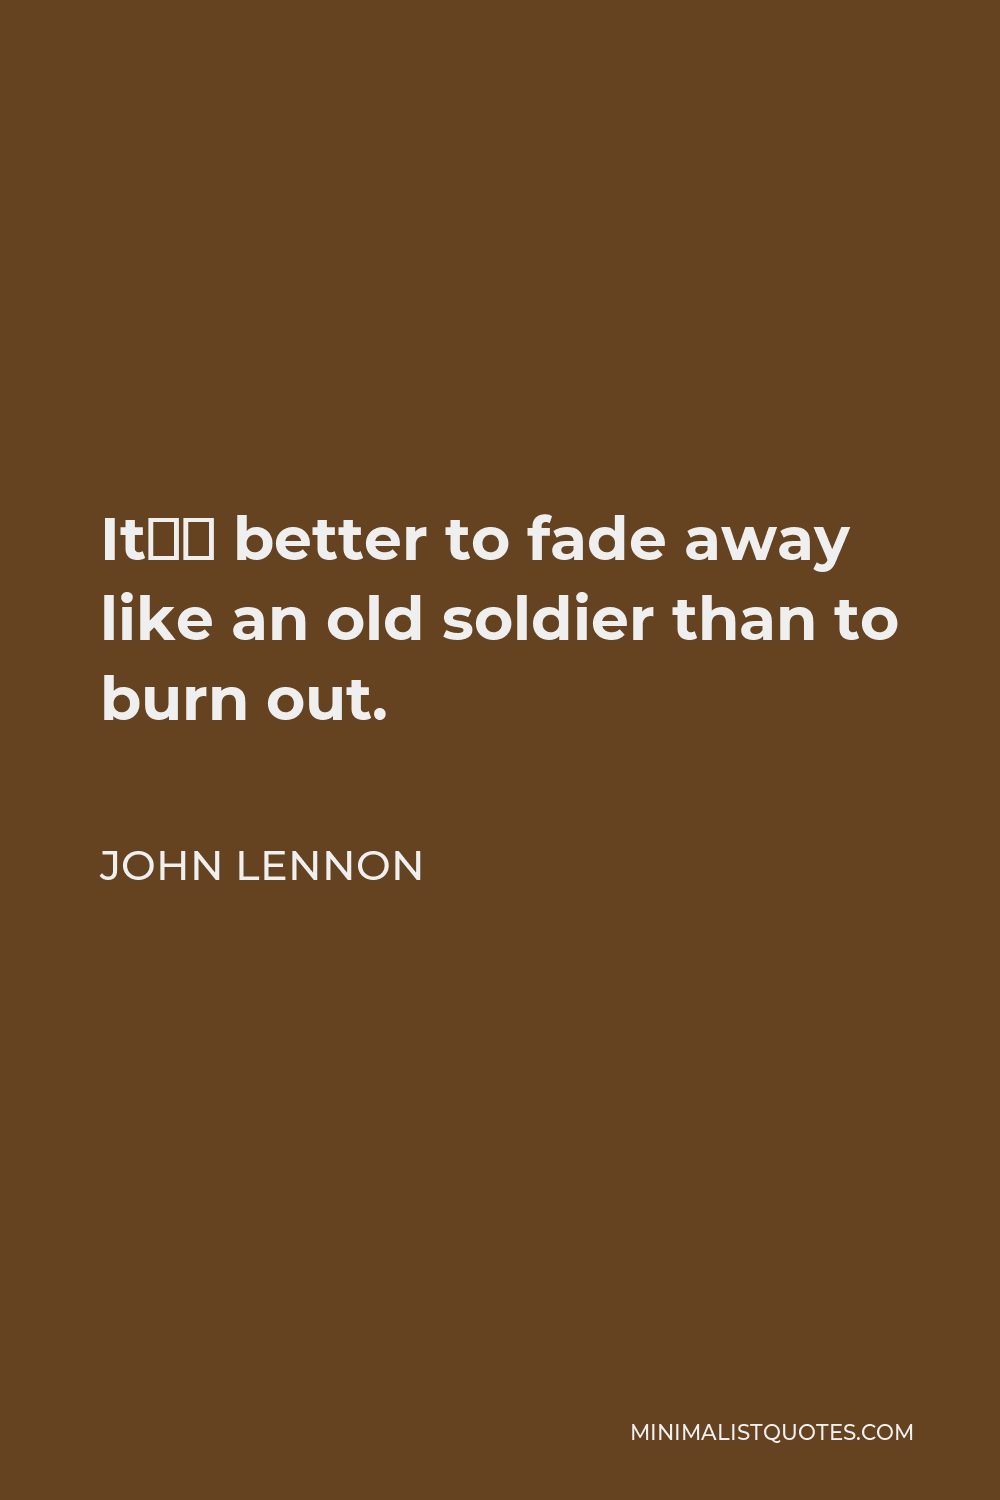 John Lennon Quote - It’s better to fade away like an old soldier than to burn out.